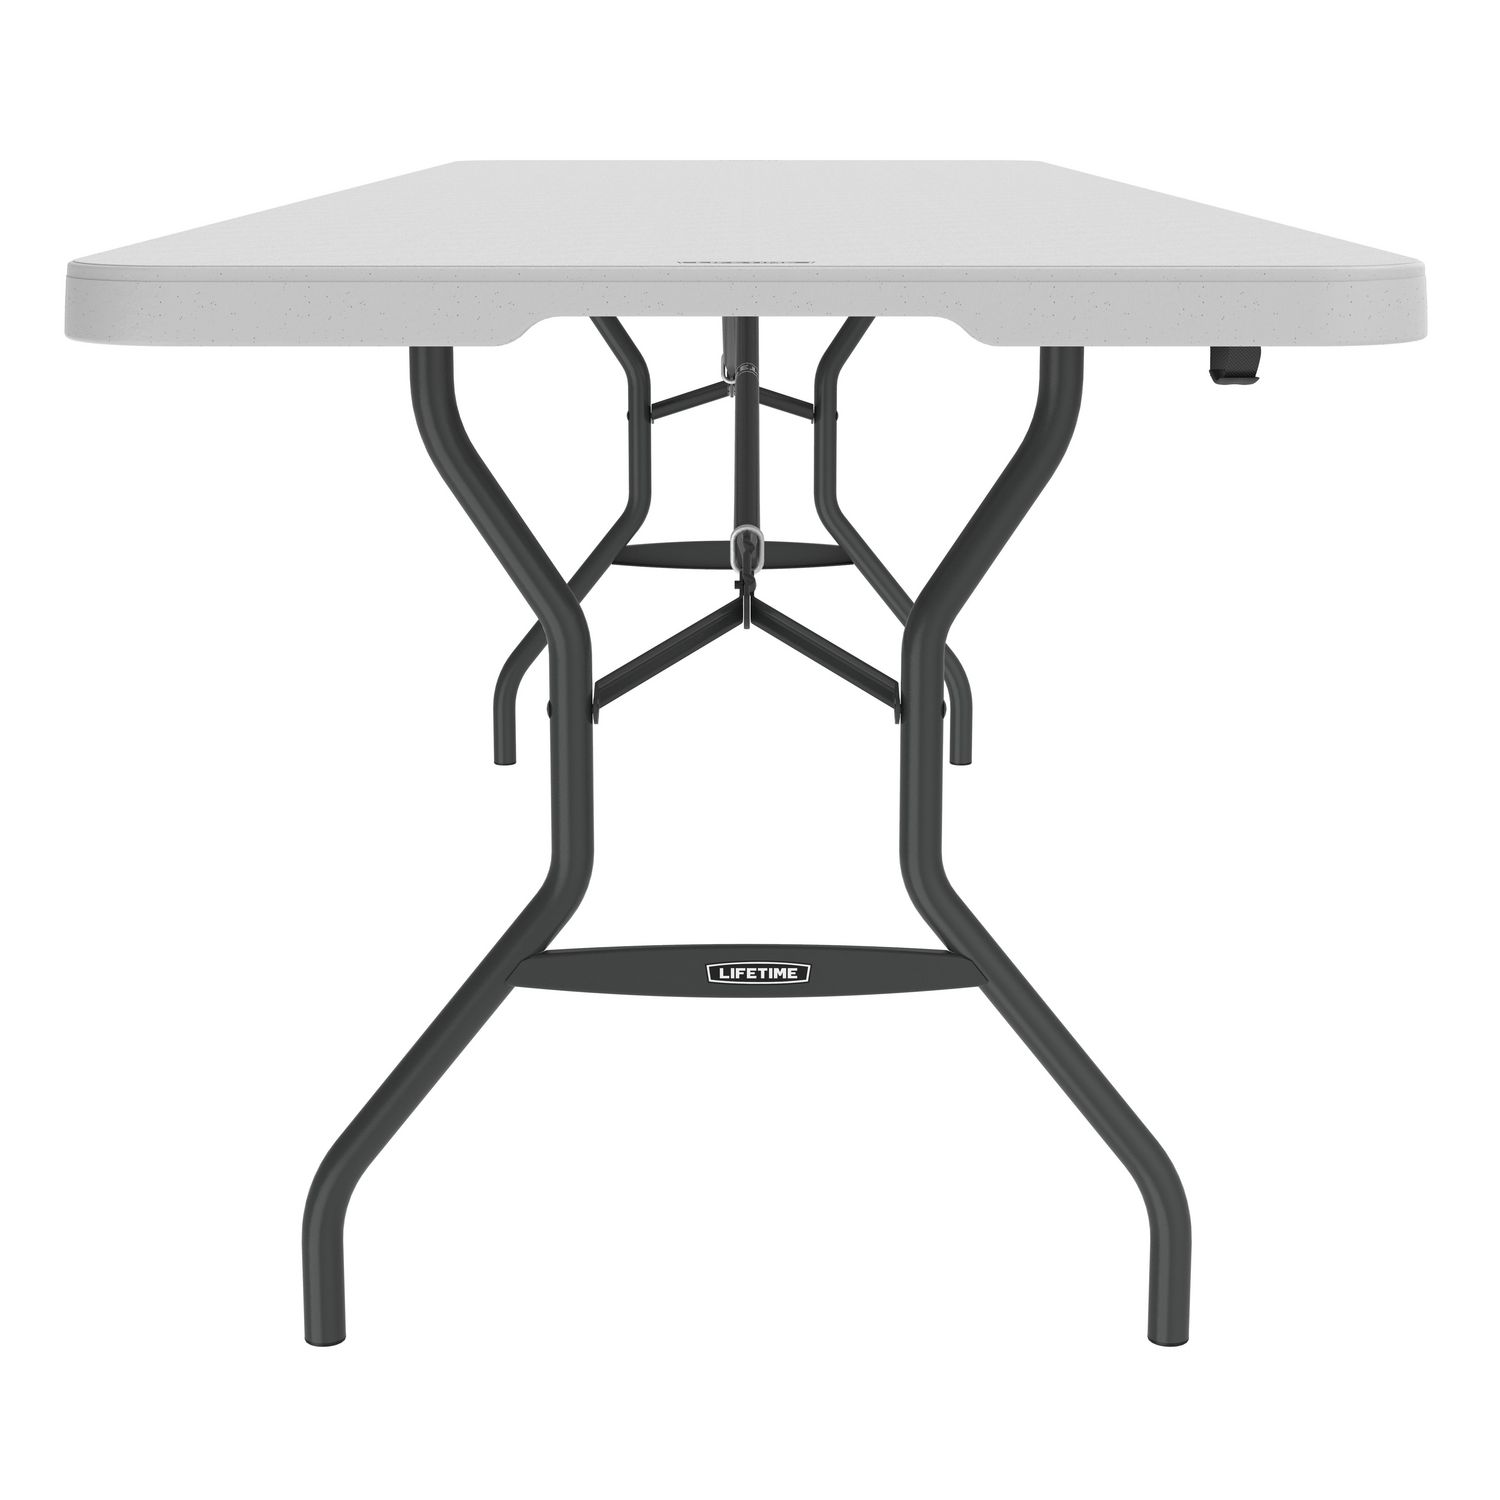 Lifetime 8' Commercial Grade Folding Table (Assorted Colors)